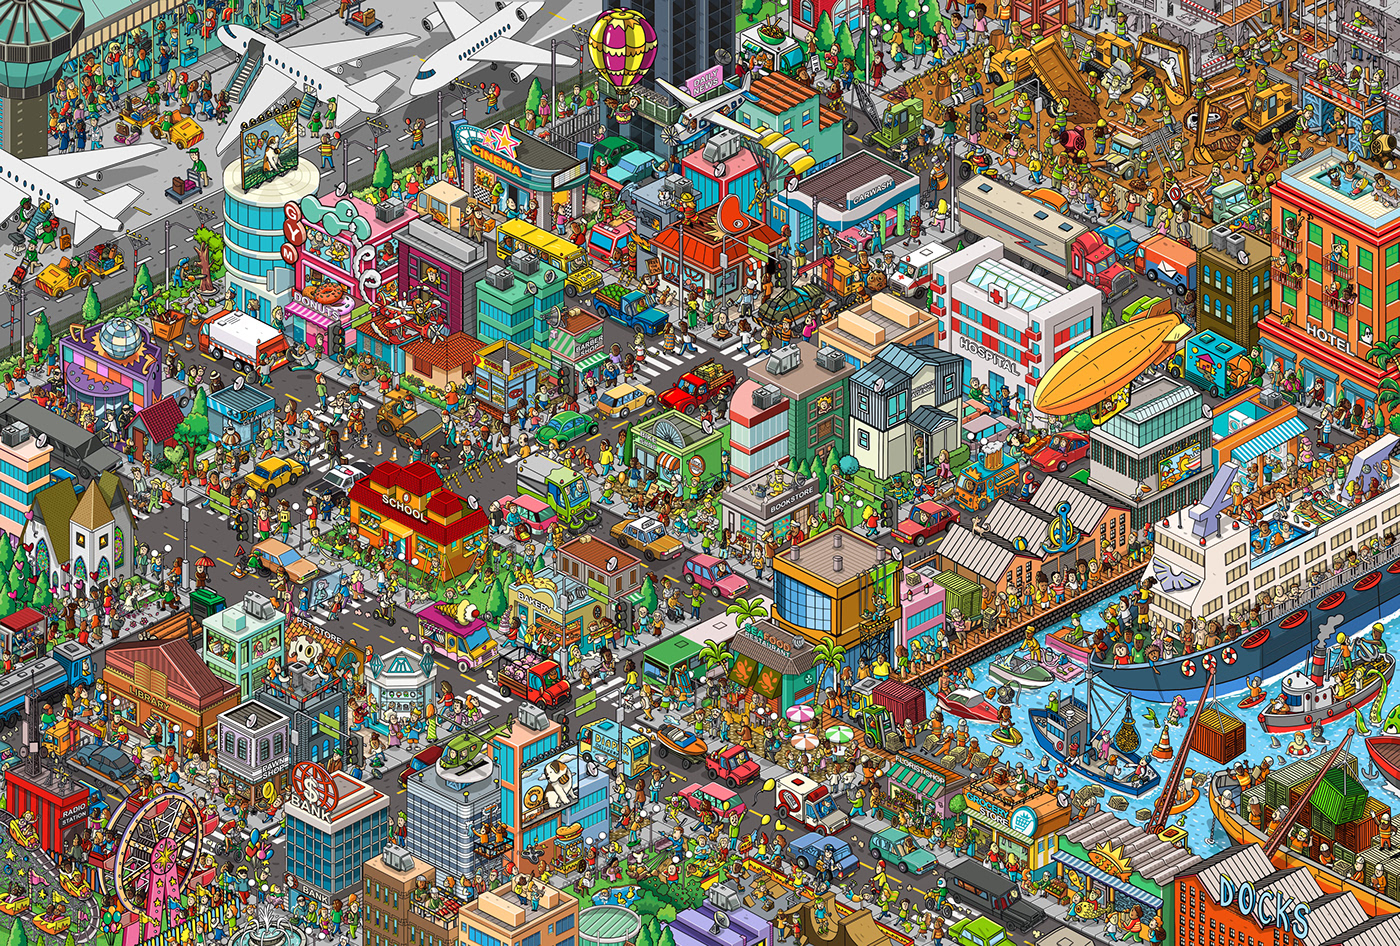 Jobs risks insurance waldo Wally search and find seek and find crowd city busy